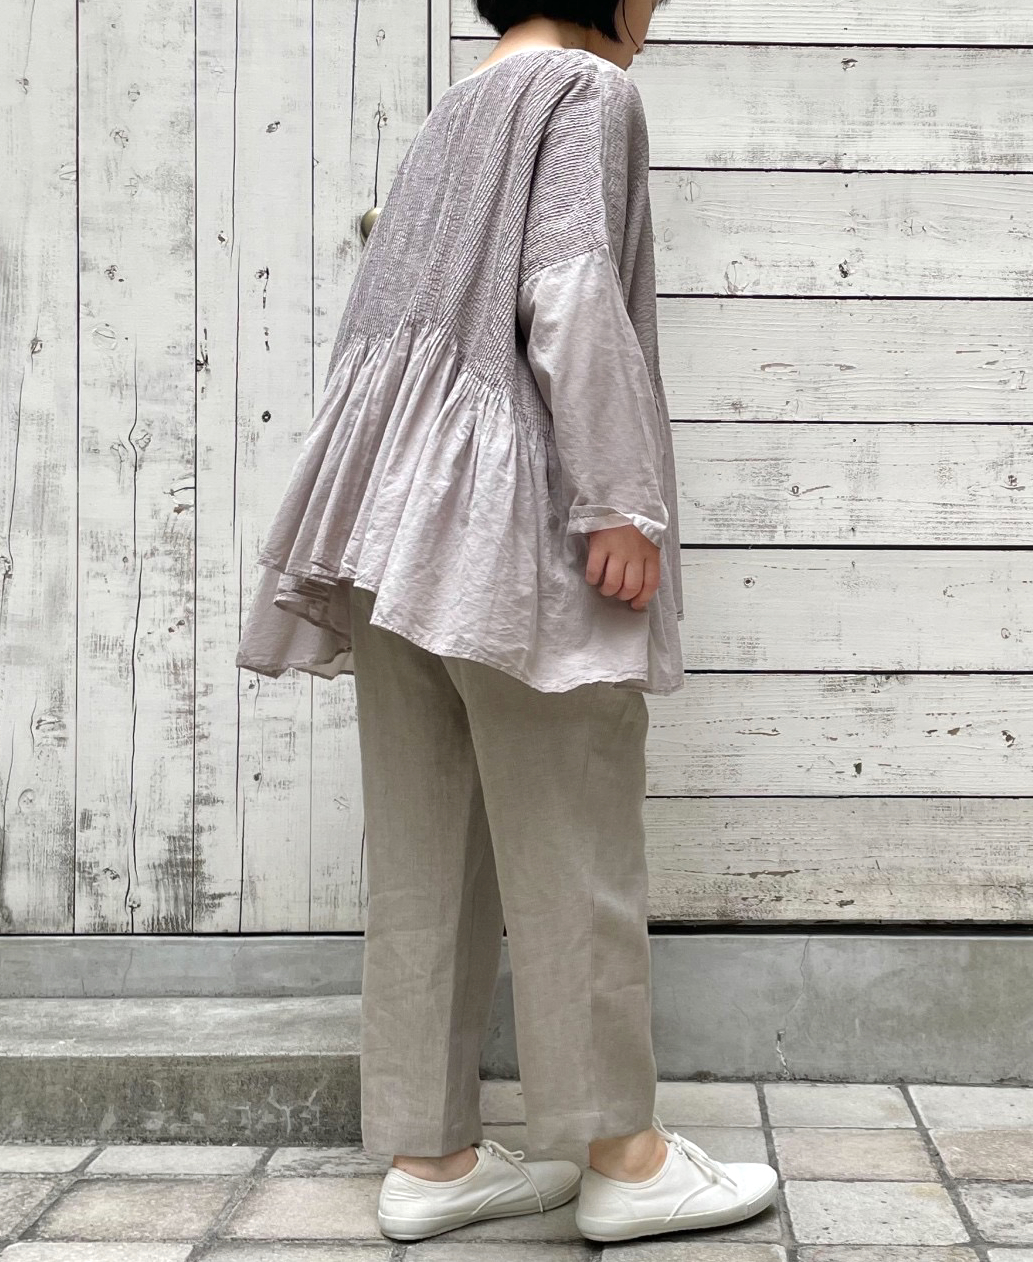 GNMDS2101LT (パンツ) LINEN TWILL EASY TAPERED PANTS